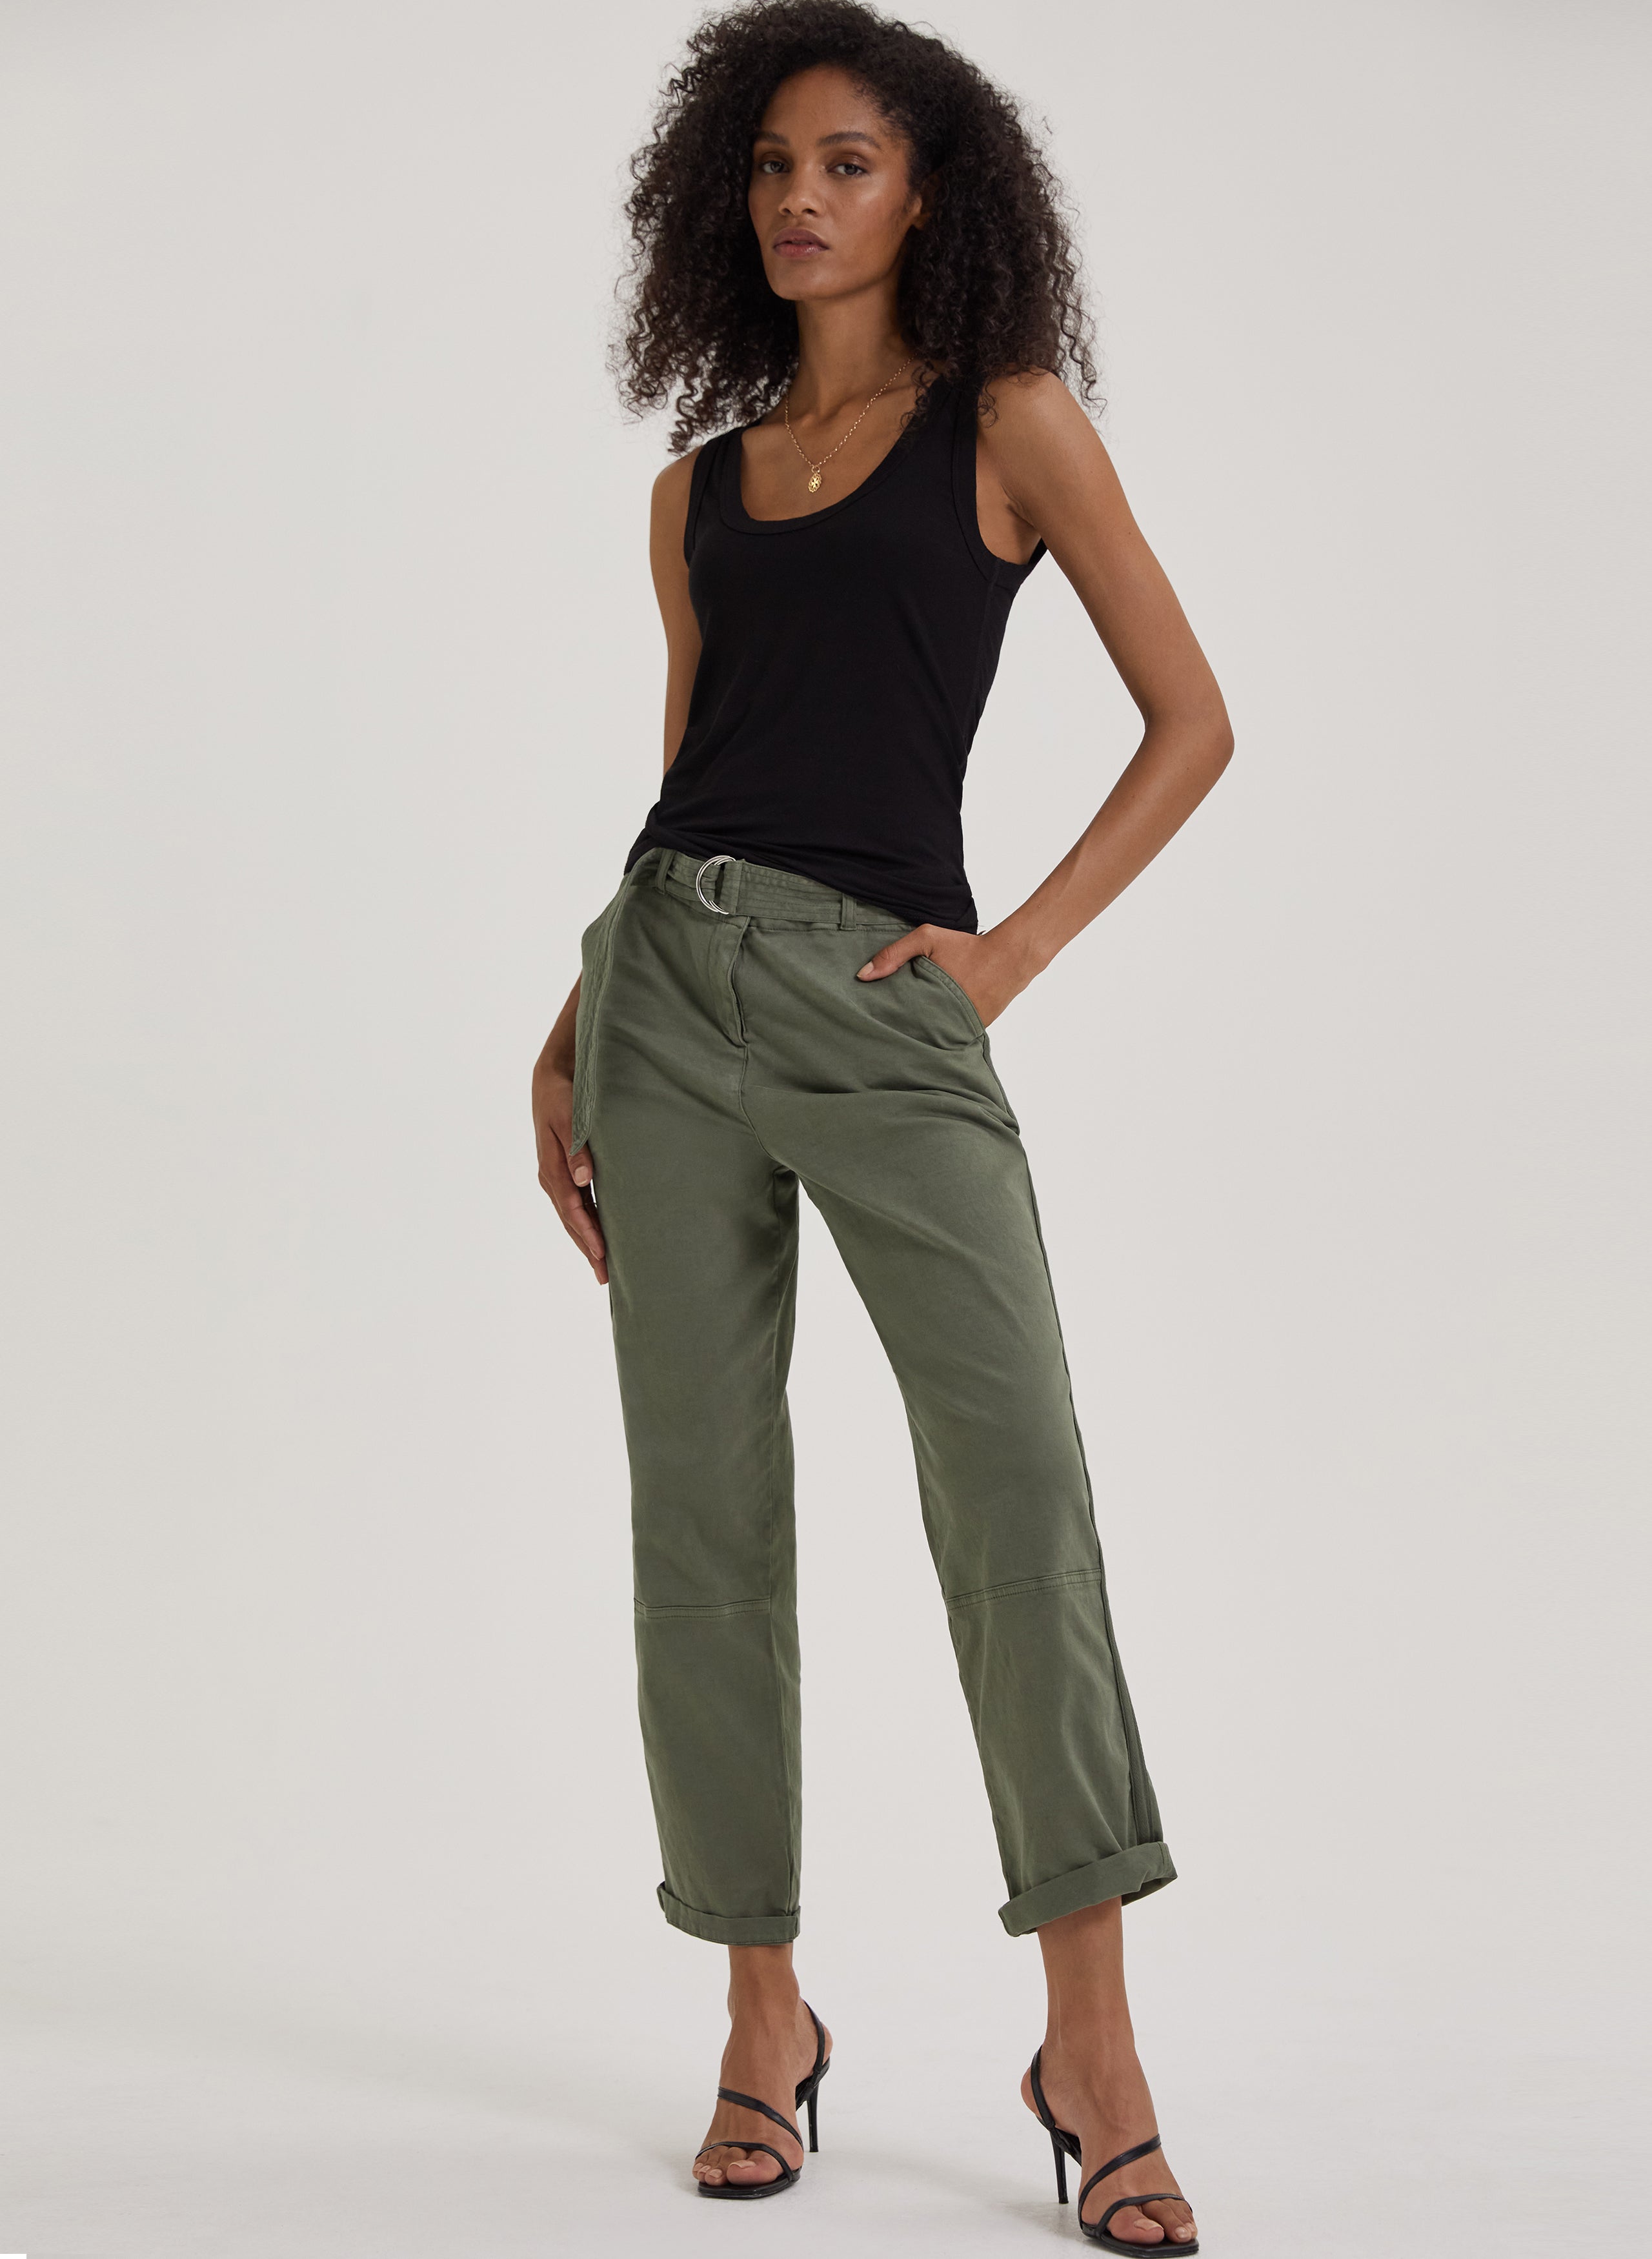 Buy dockstreet Womens Twill Cargo for Women with Twin Side Pockets and  Drawstring Closure with Cinch Bottom..4/12MBDdRizCargoOlive 28 at Amazon.in